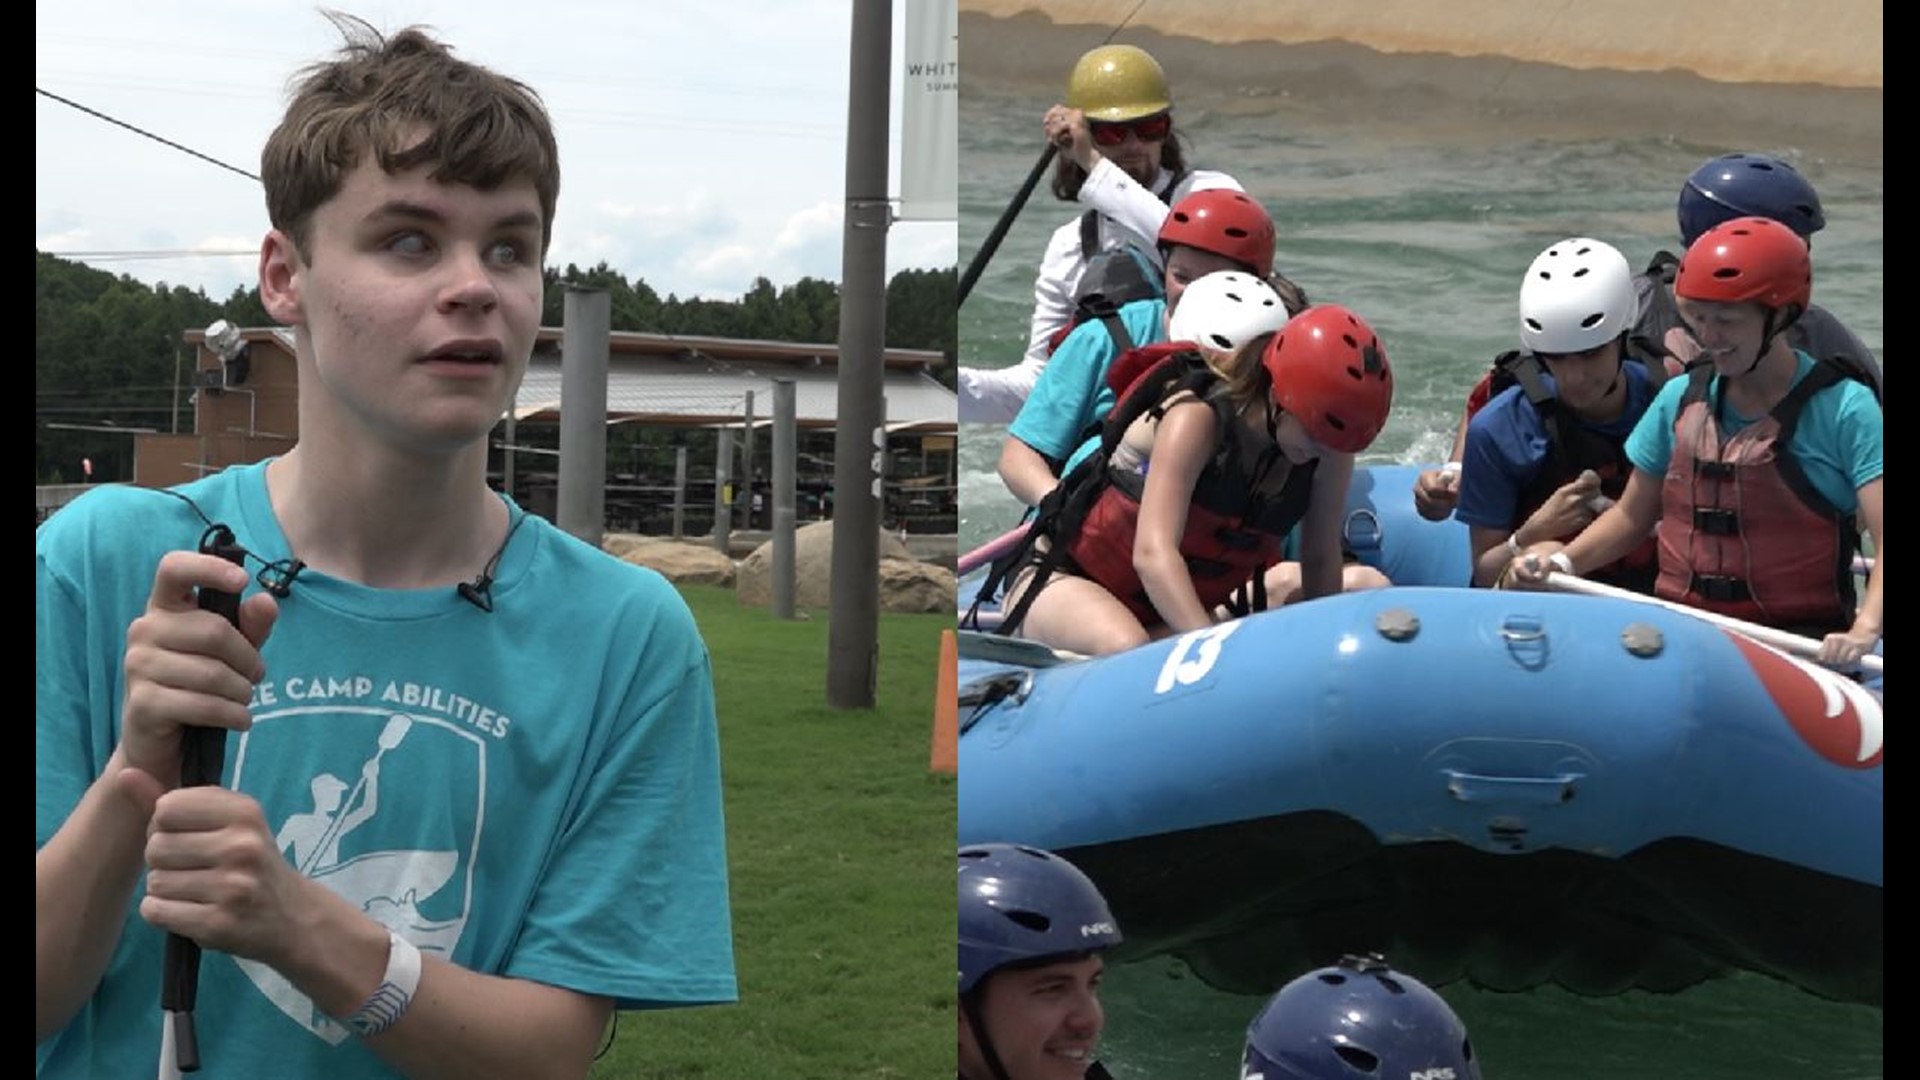 Will Thames and several other visually impaired students are able to spend a fun-filled day at the Whitewater Center thanks to SEE (Student Enrichment Experience) Camp H2O. SEE is a camp for children who are blind or visually impaired.